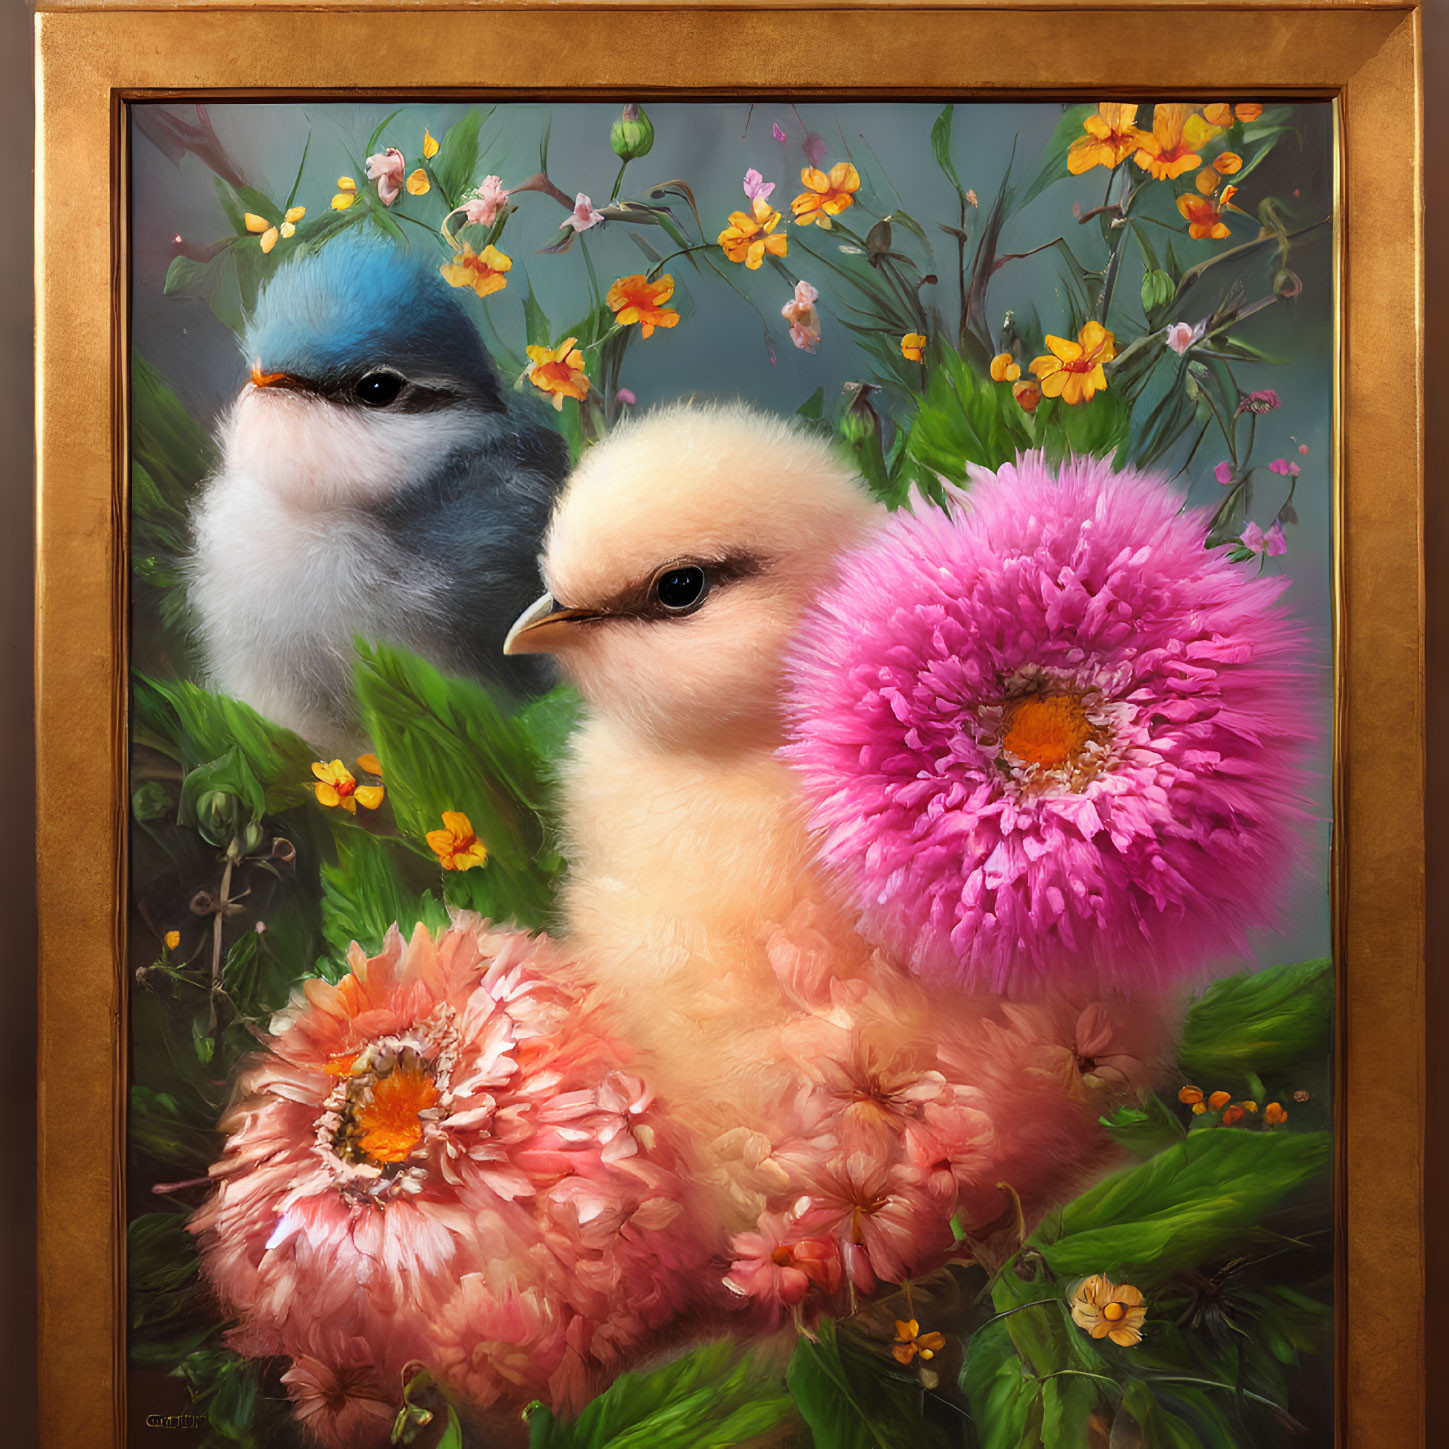 Colorful artwork featuring blue-headed bird, fluffy chick, and vibrant flowers in golden frame